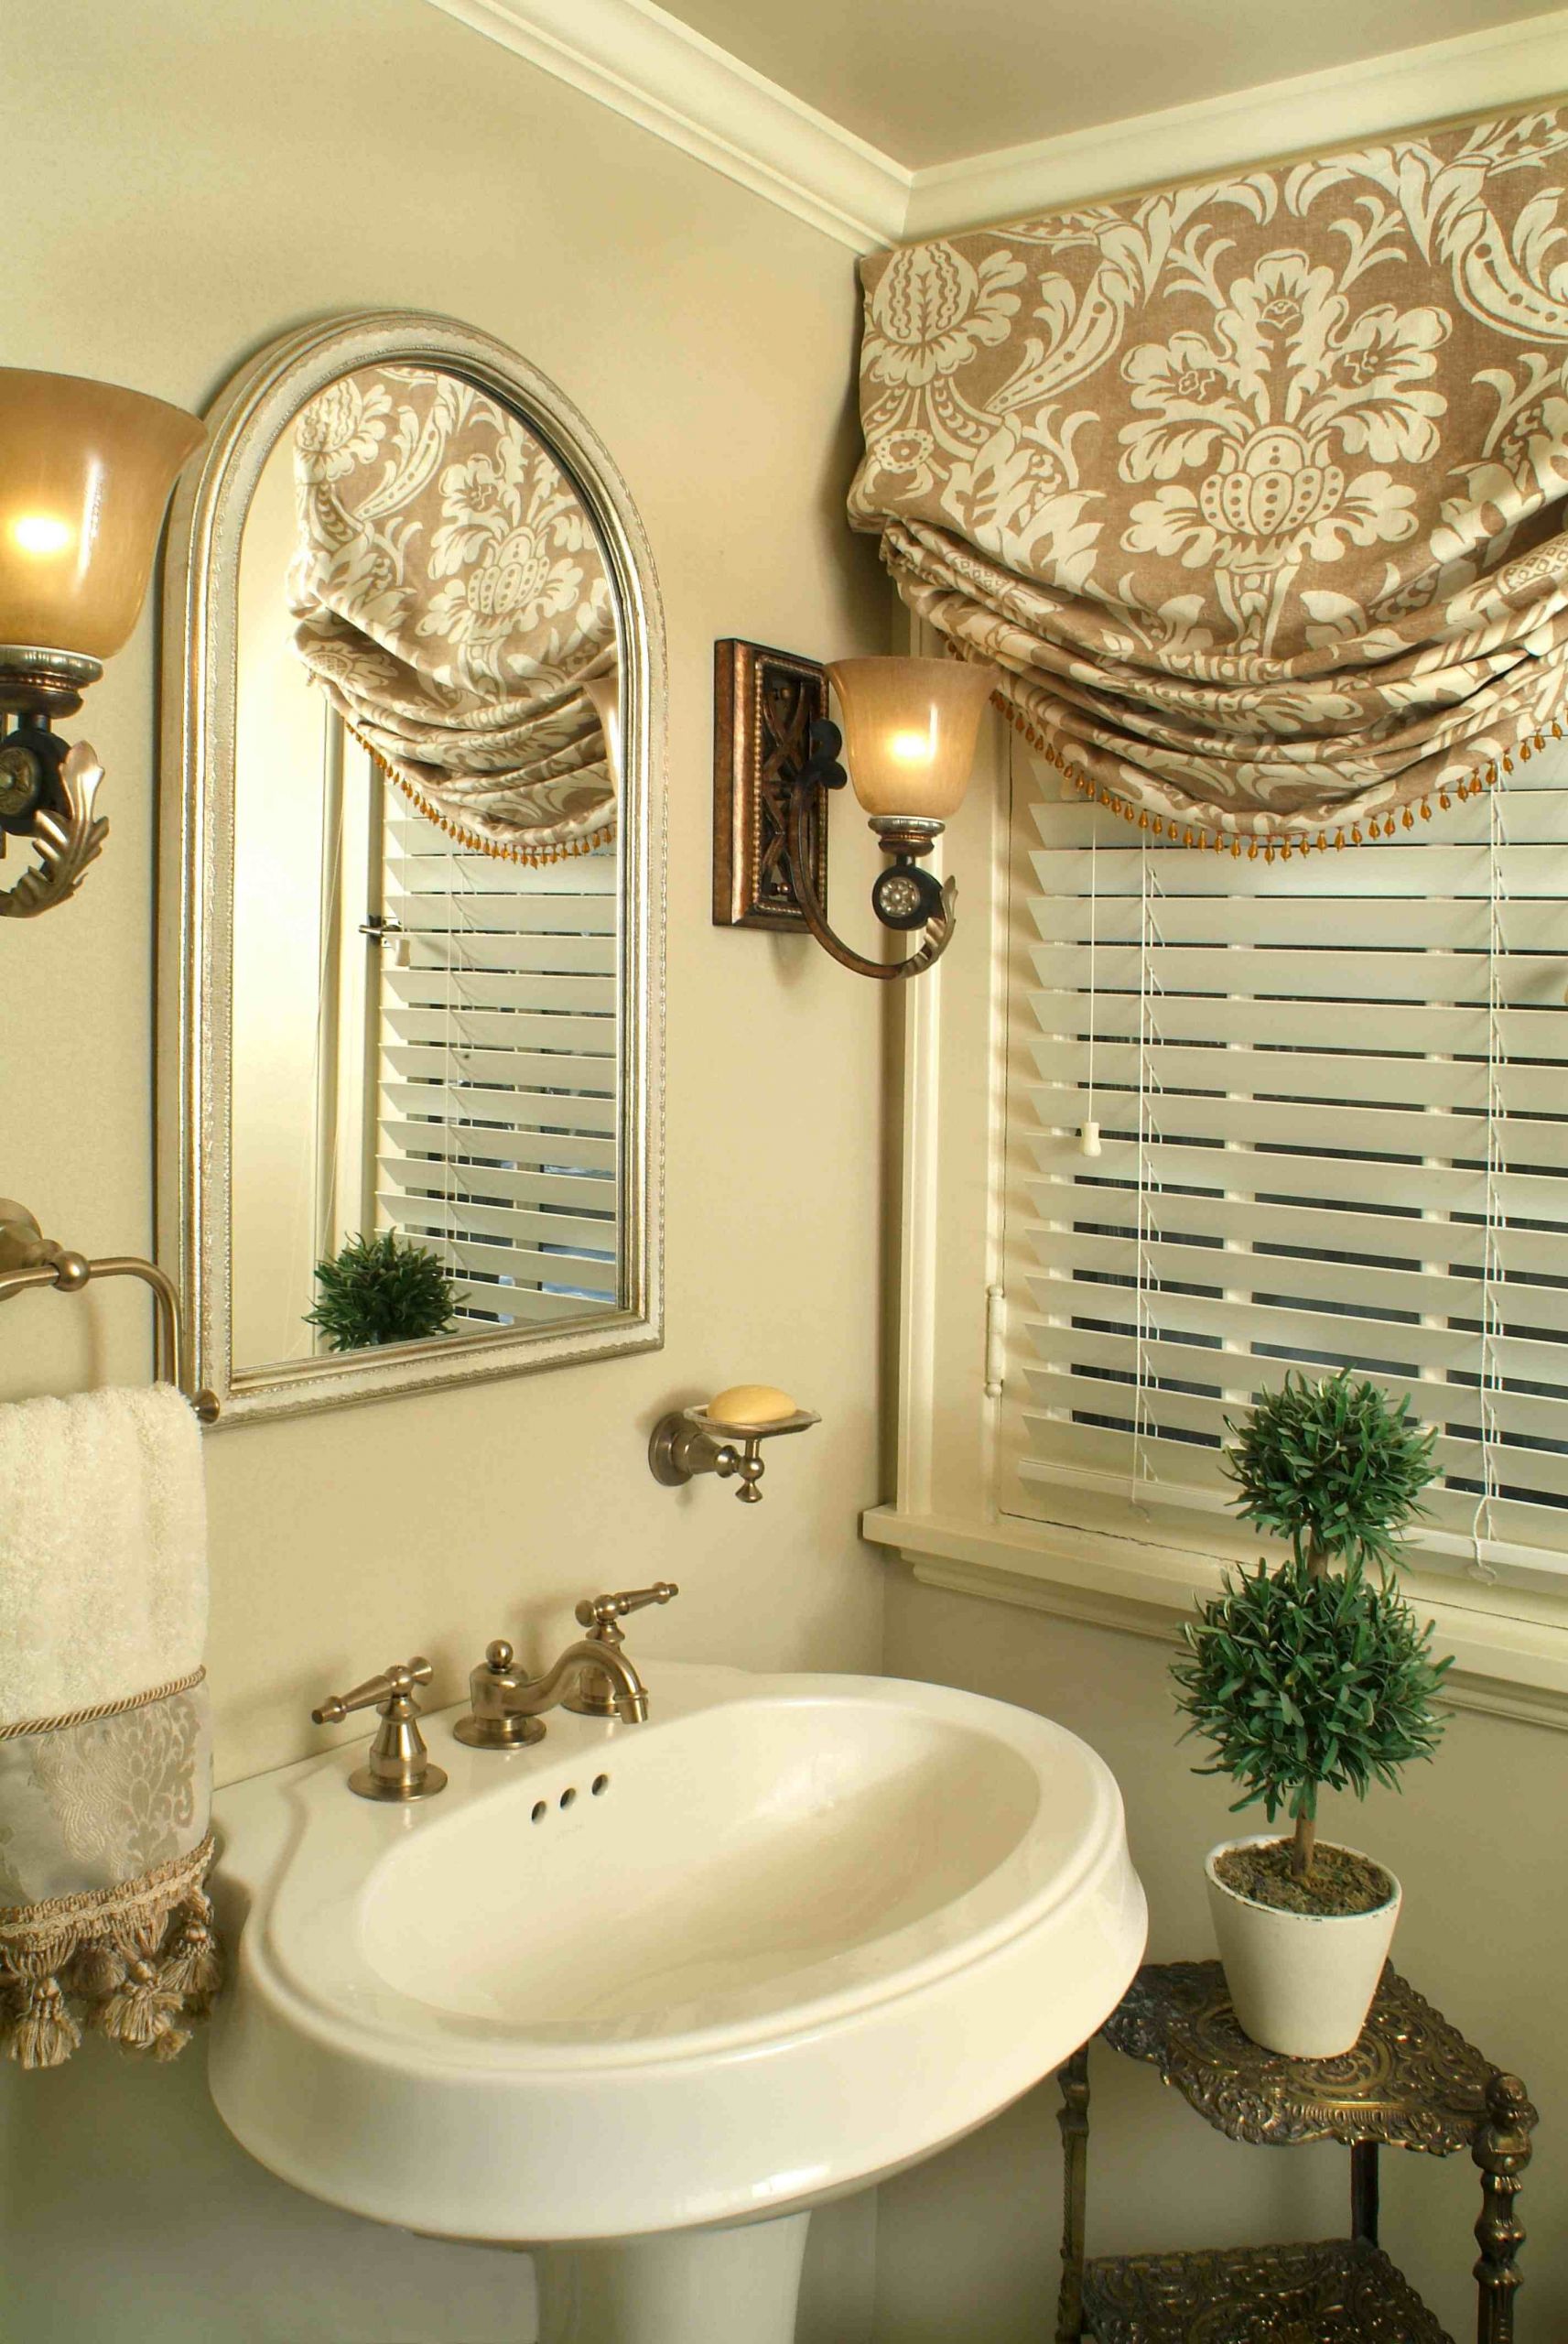 Small Bathroom Window Curtains
 33 DIY Roman Shade Ideas To Inspire Your Decorating